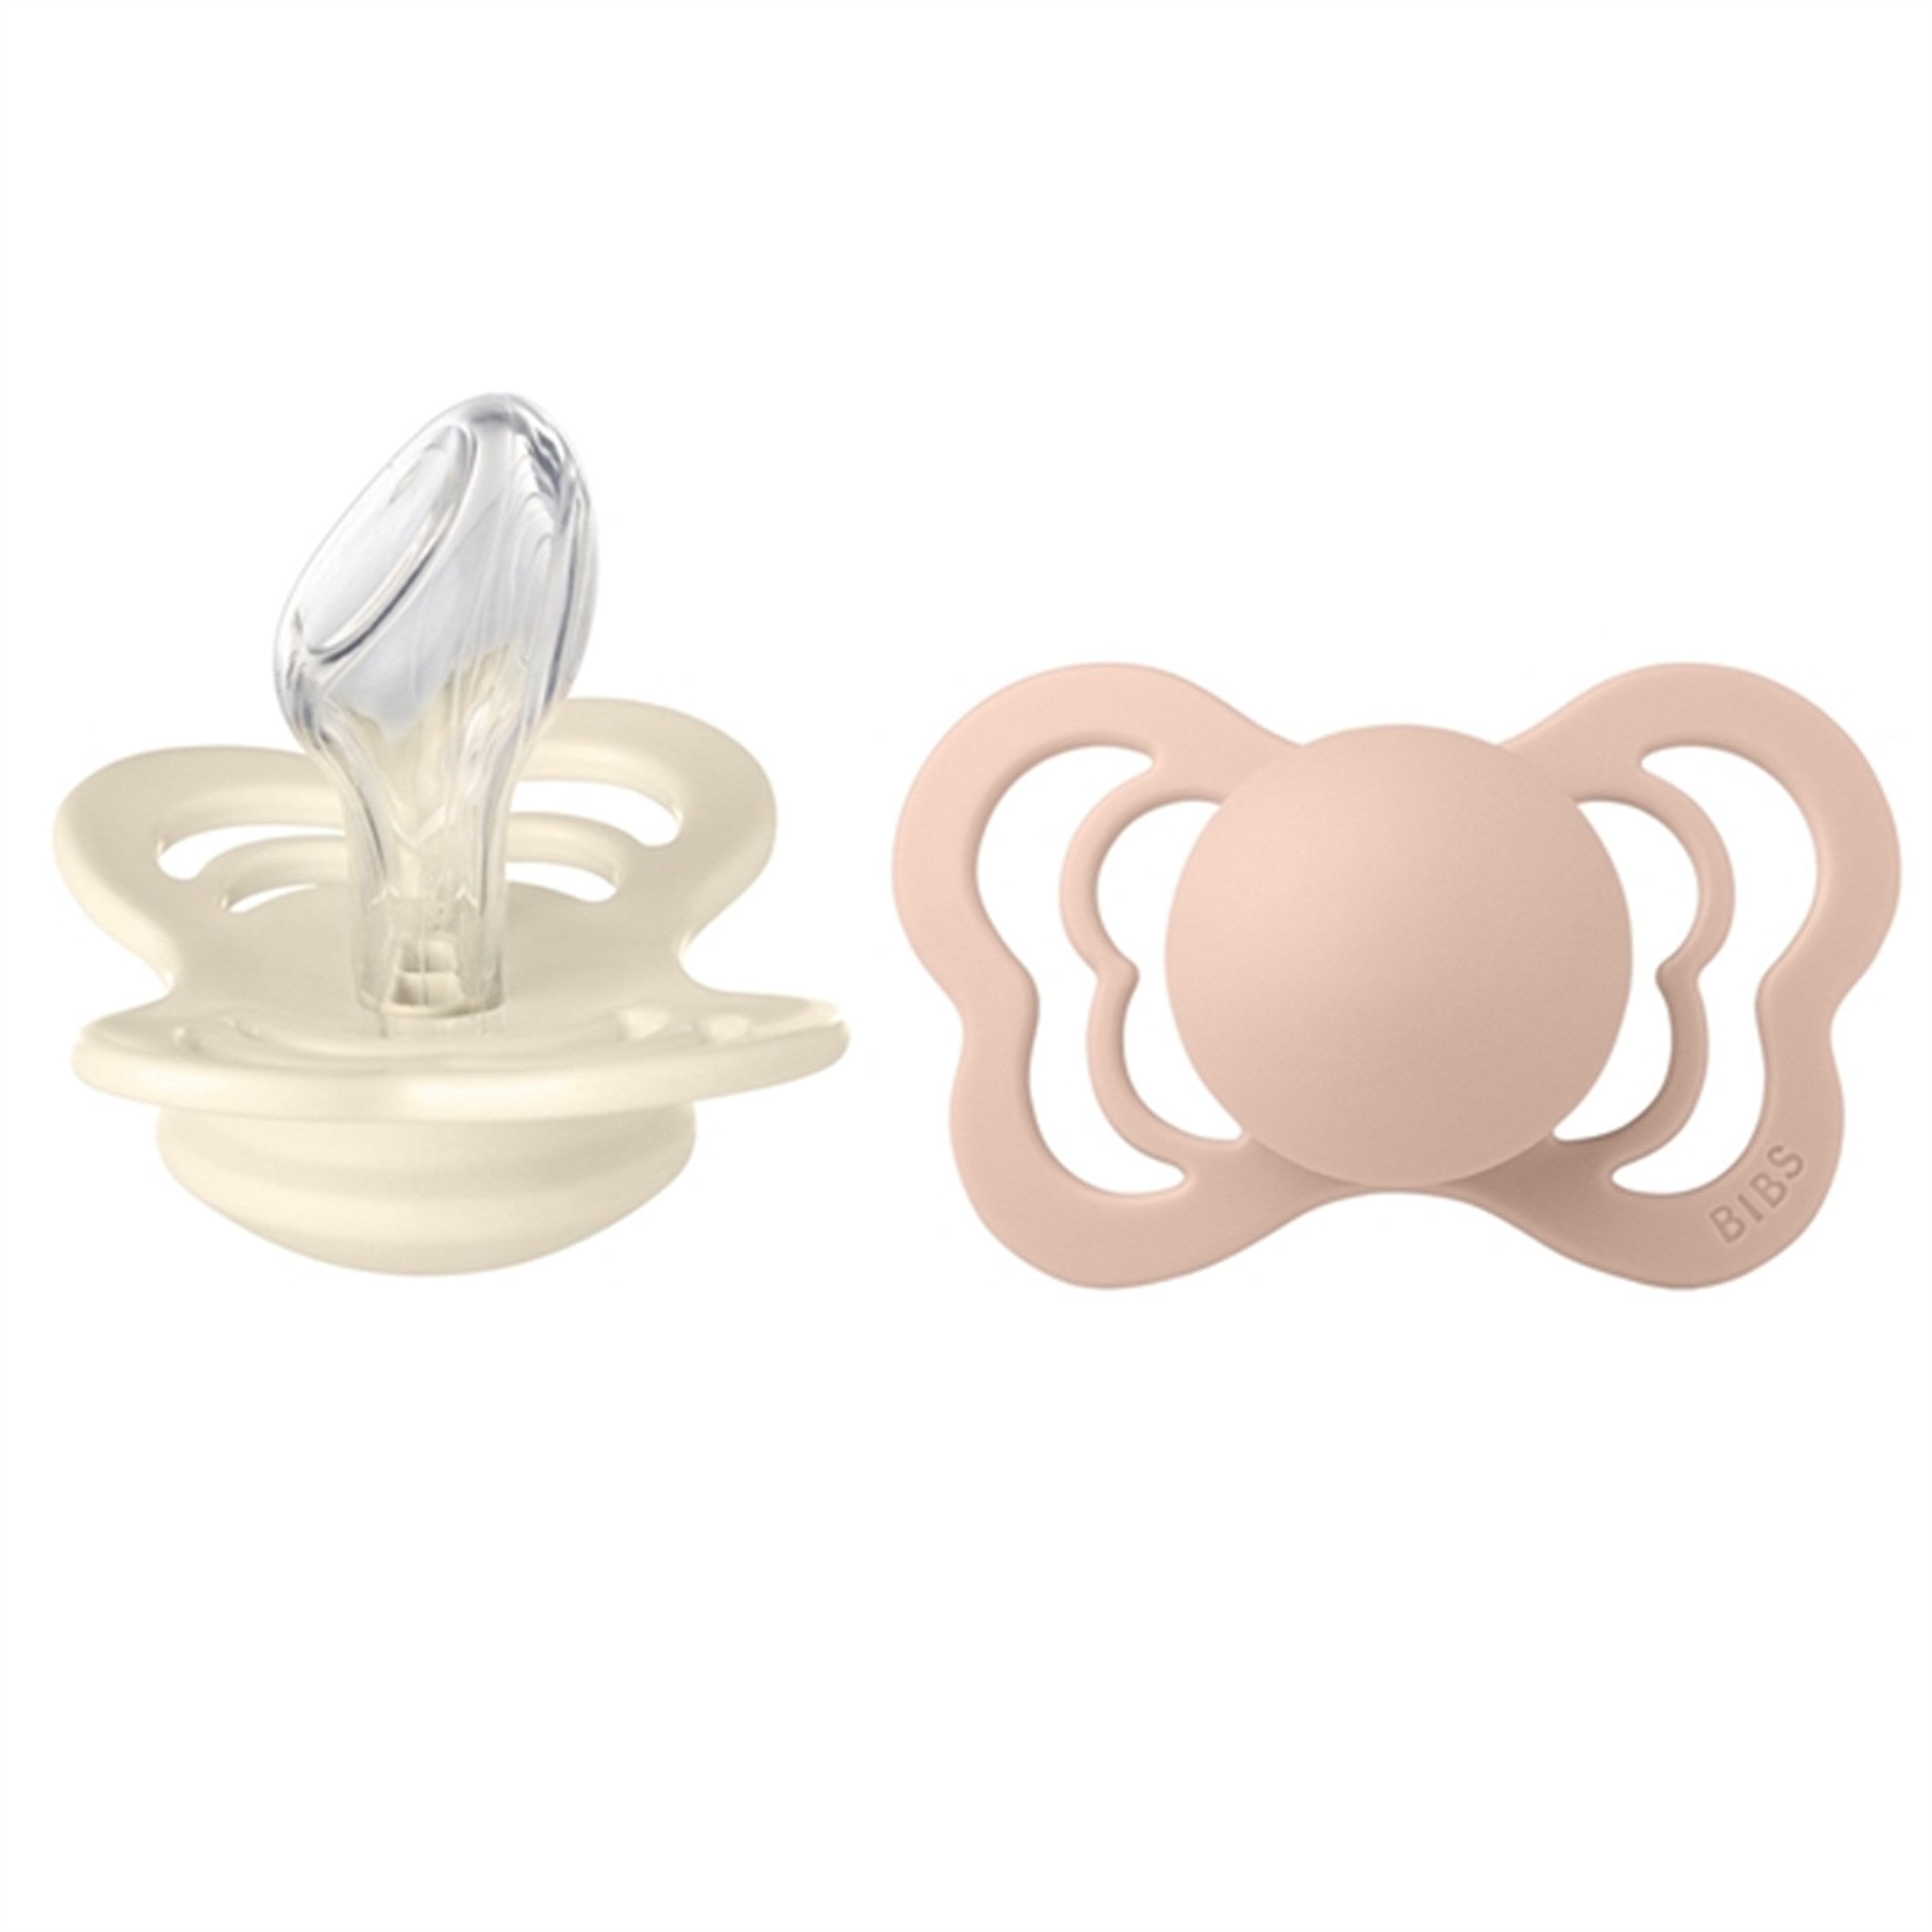 Bibs Couture Silikone Sutter 2-pack Anatomisk Ivory/Blush